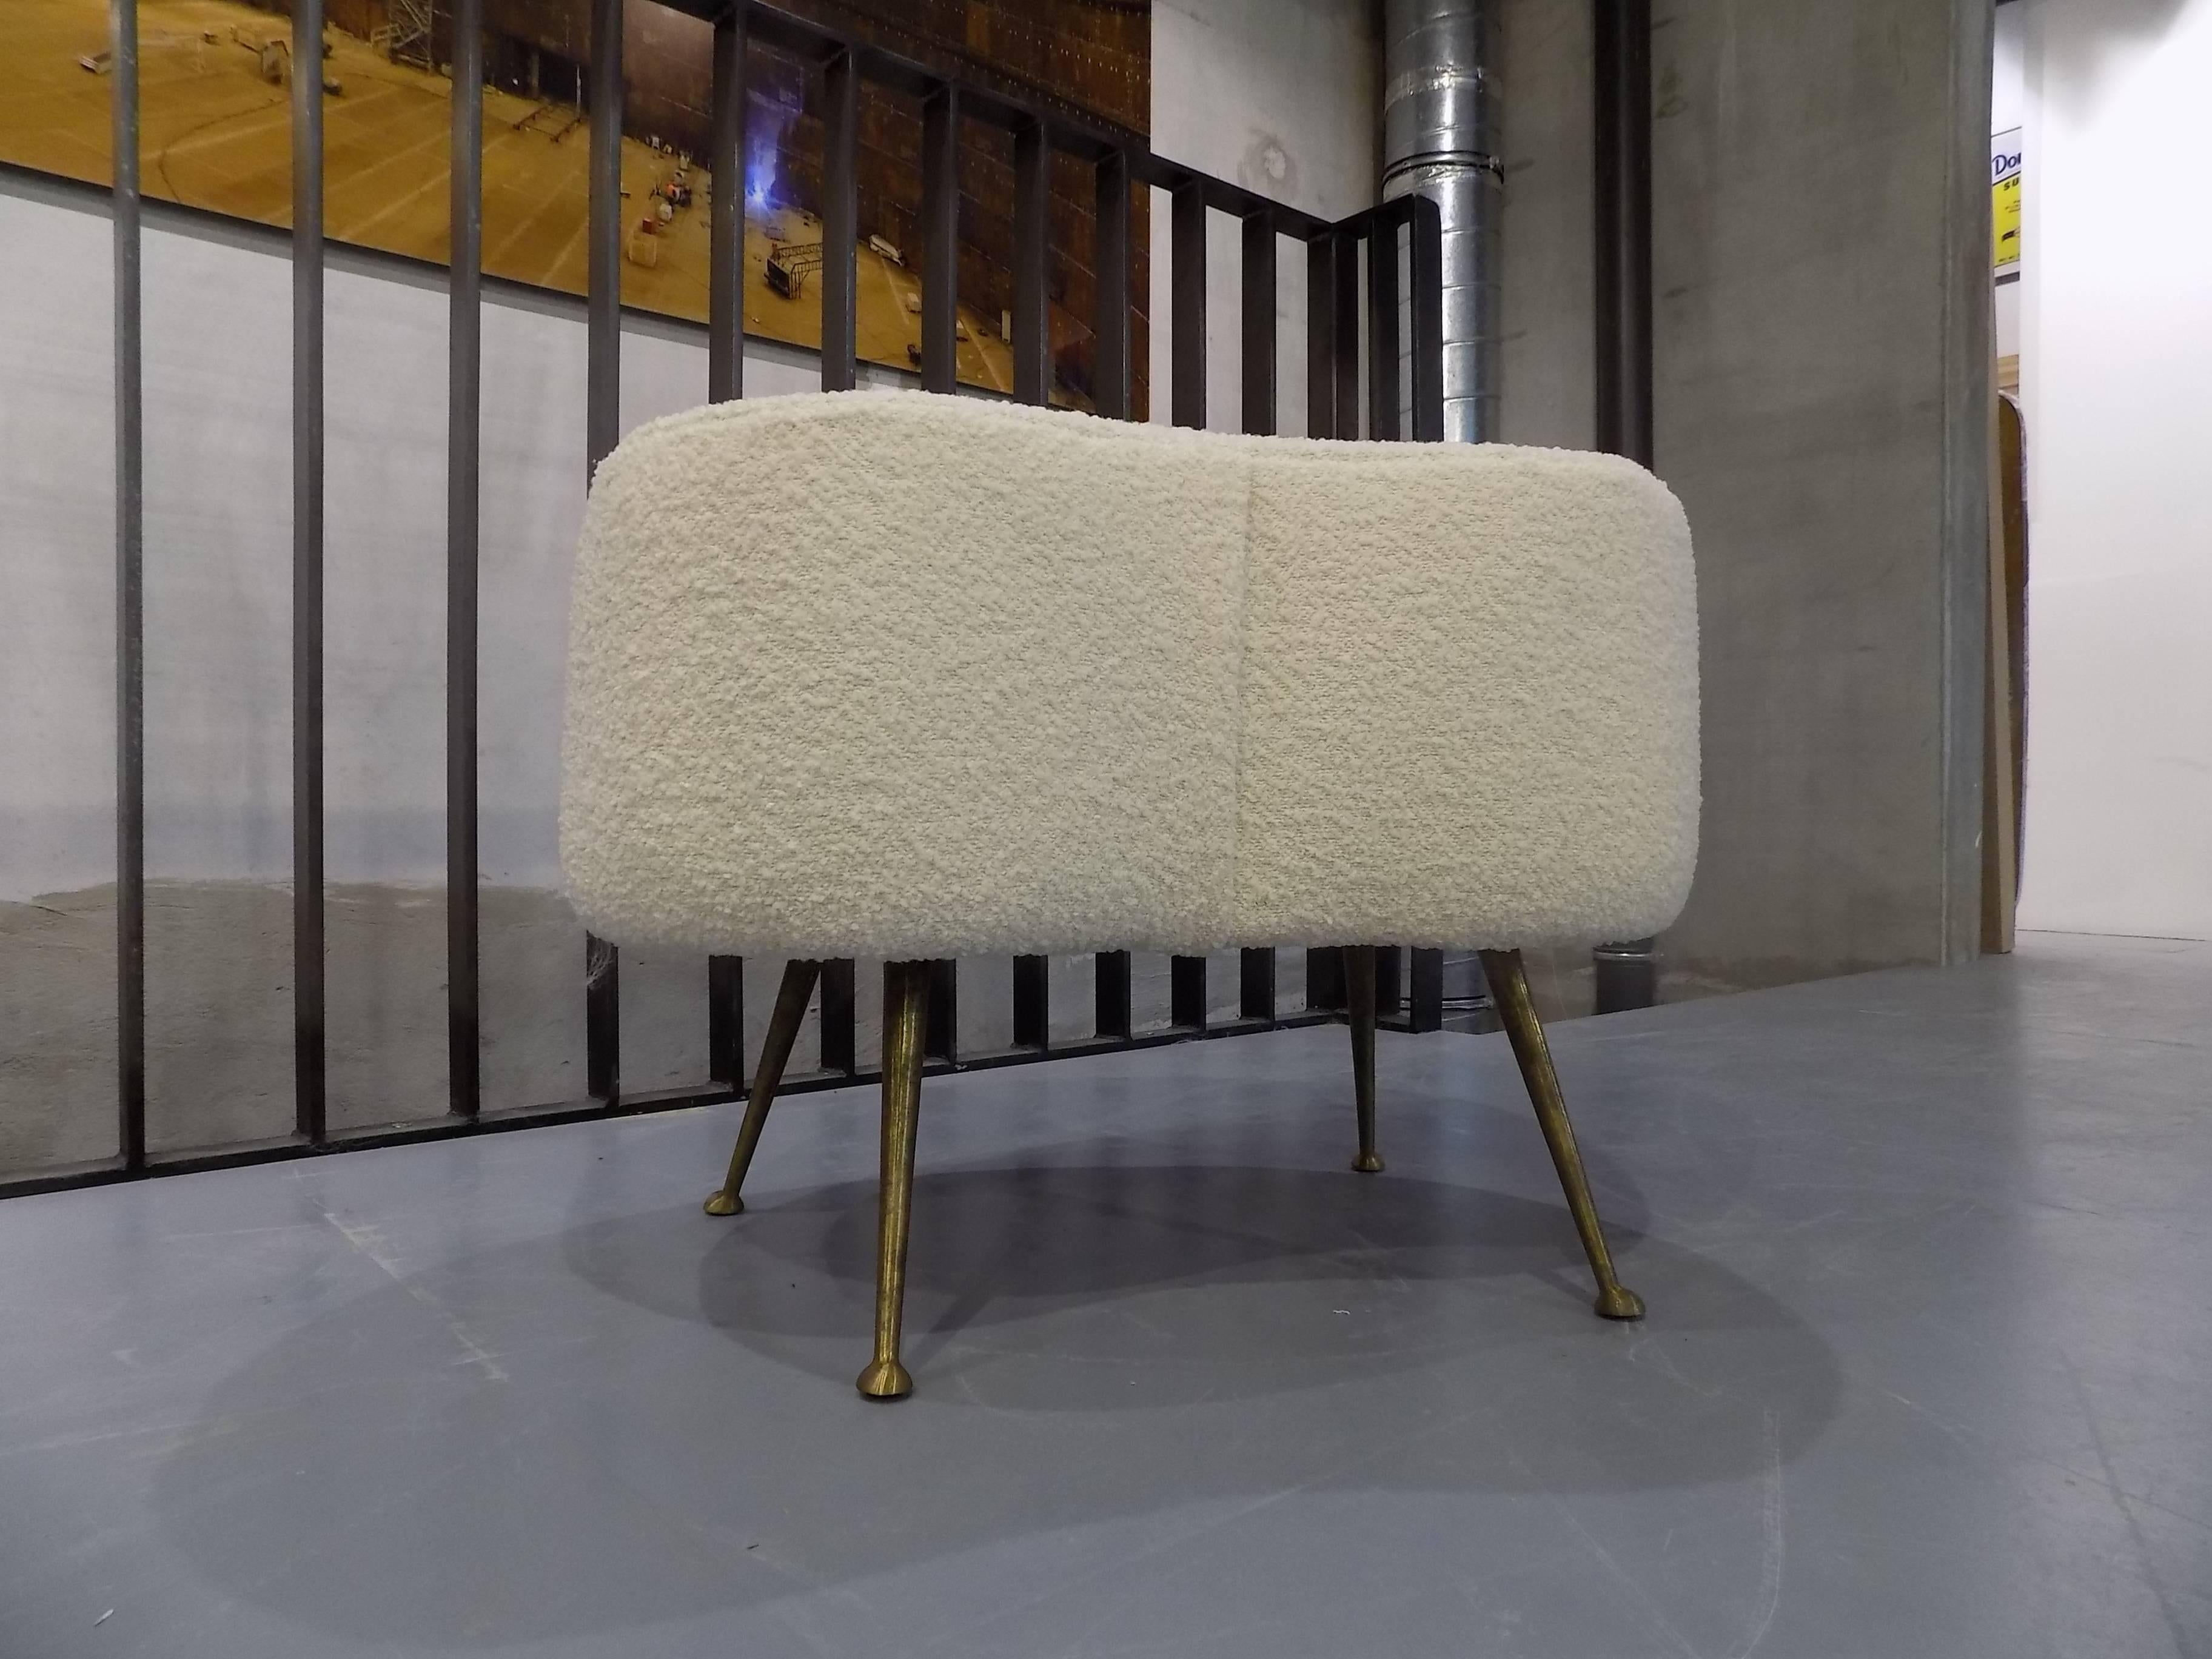 Huge bench with wool and brass feet. Contemporary edition made in Italy and designed by L'Atelier 55.